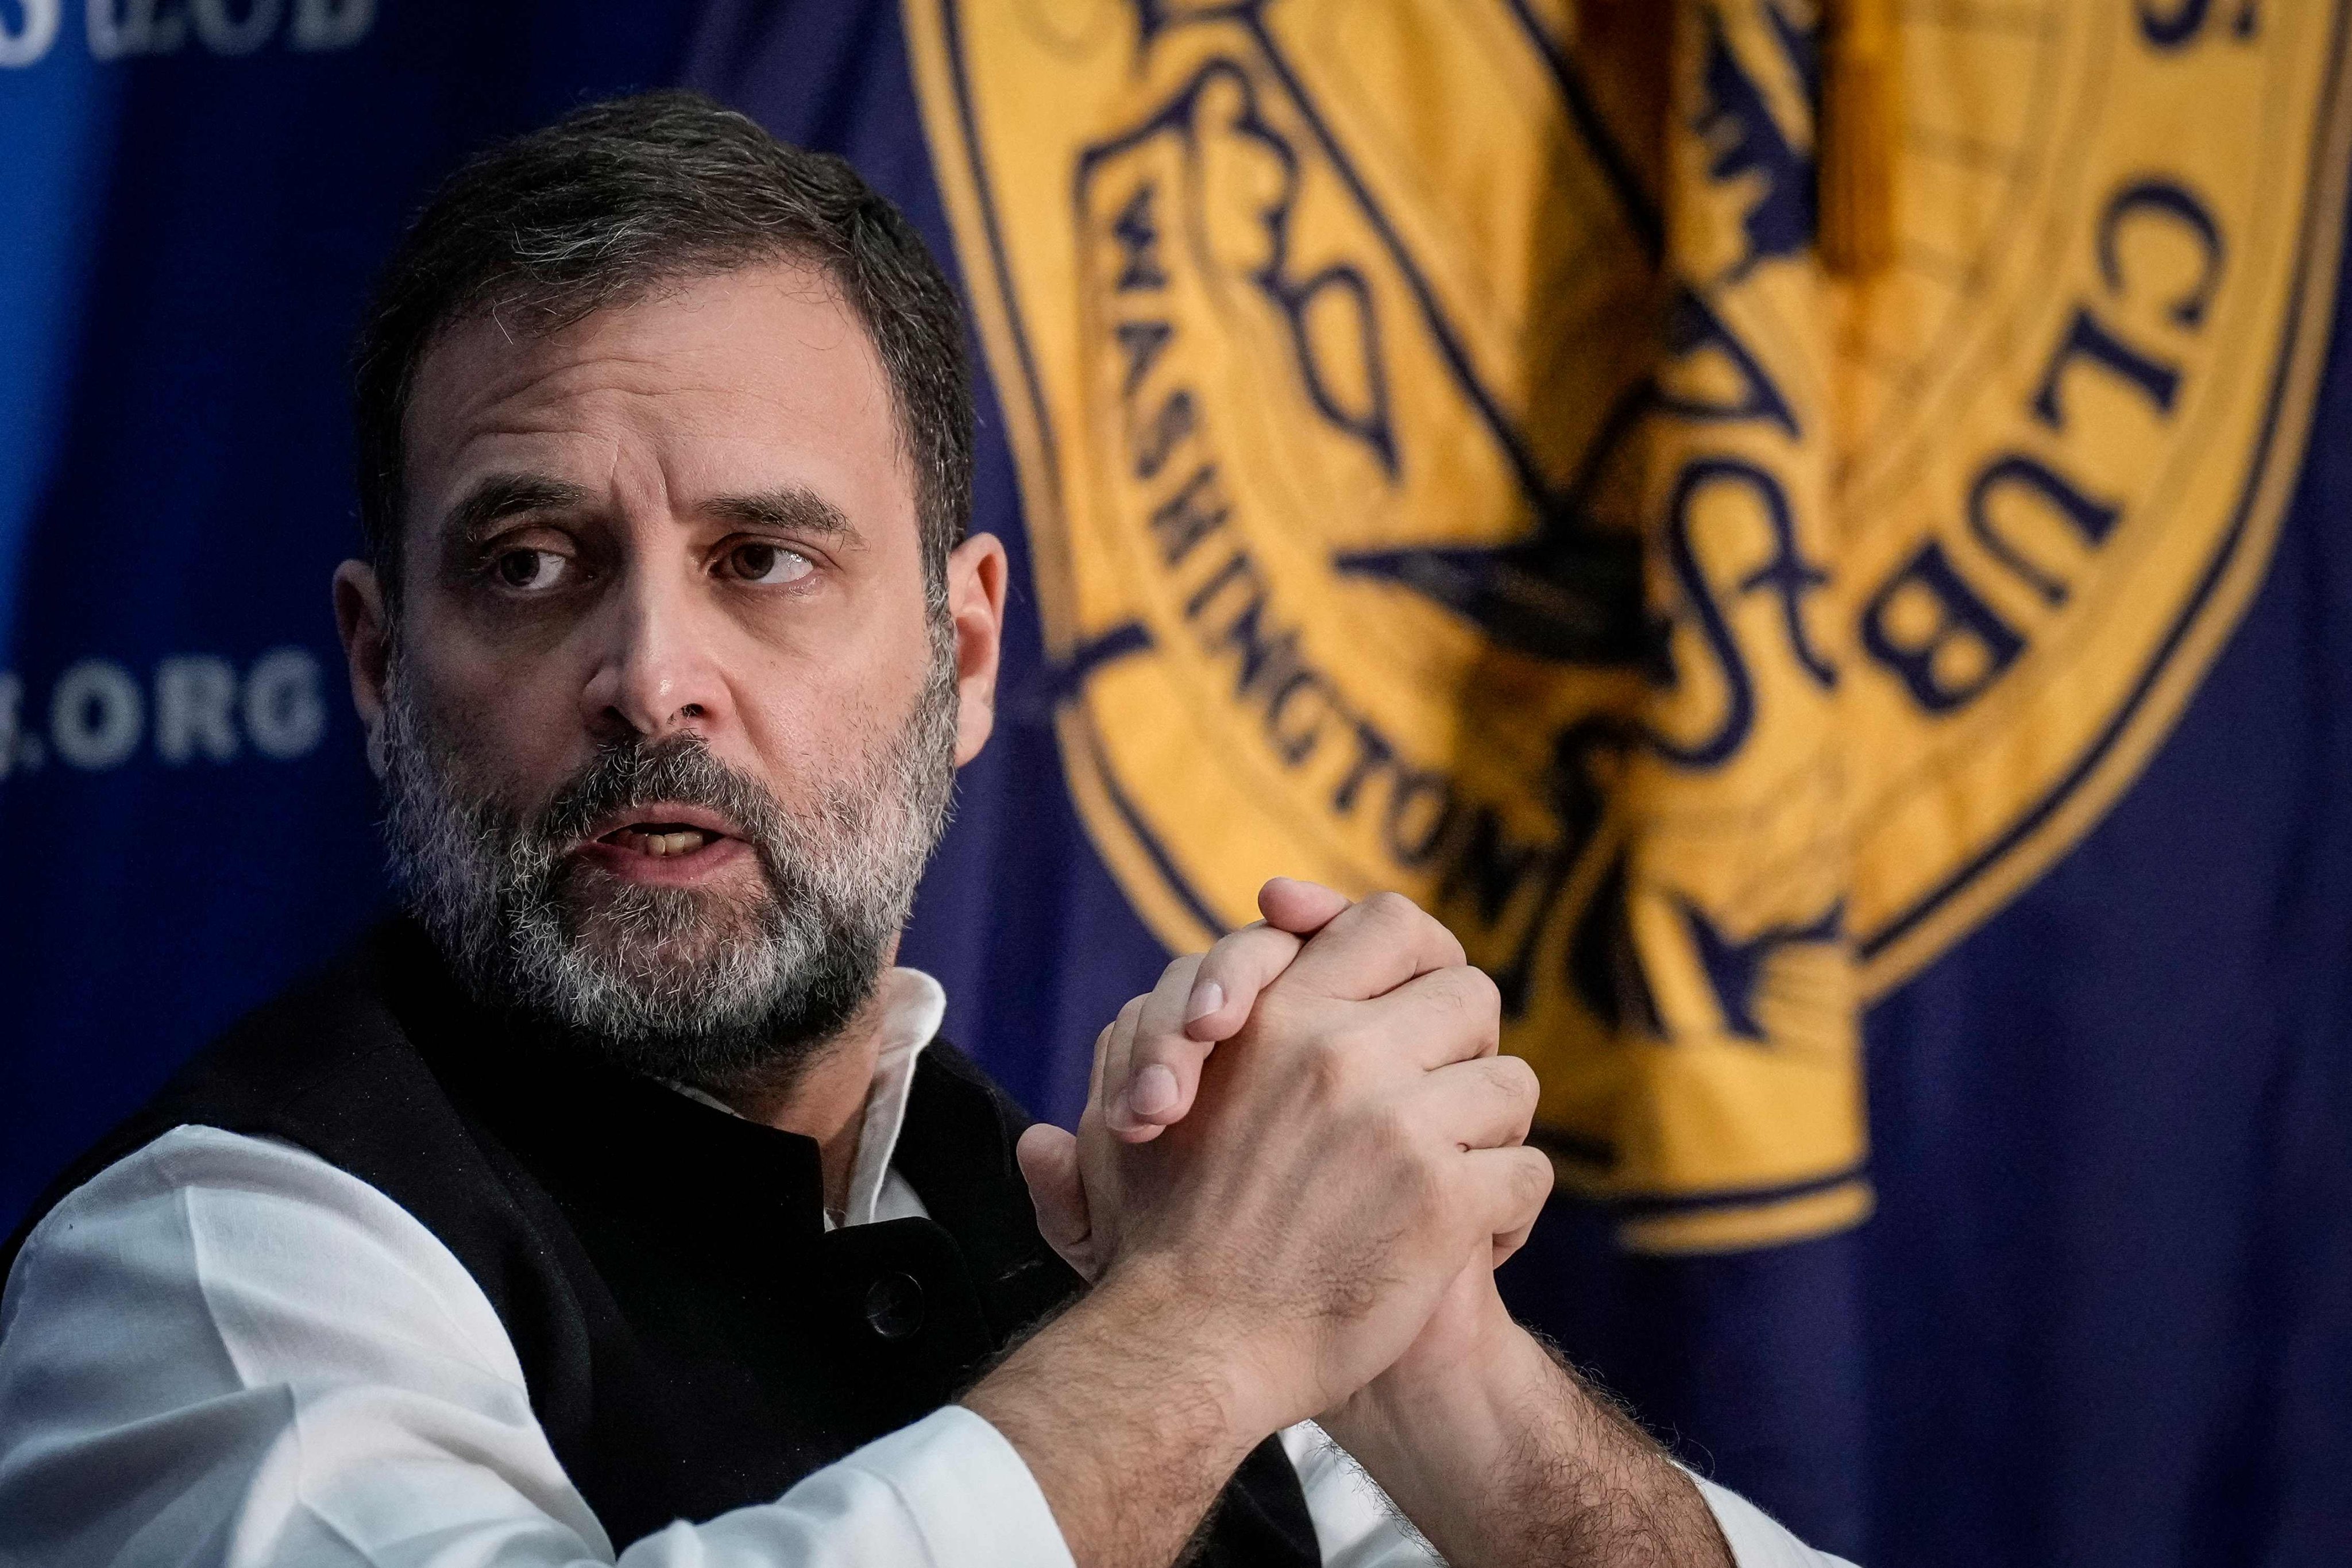 Indian opposition leader Rahul Gandhi speaks at the National Press Club in Washington on Thursday. Photo: Getty Images via AFP